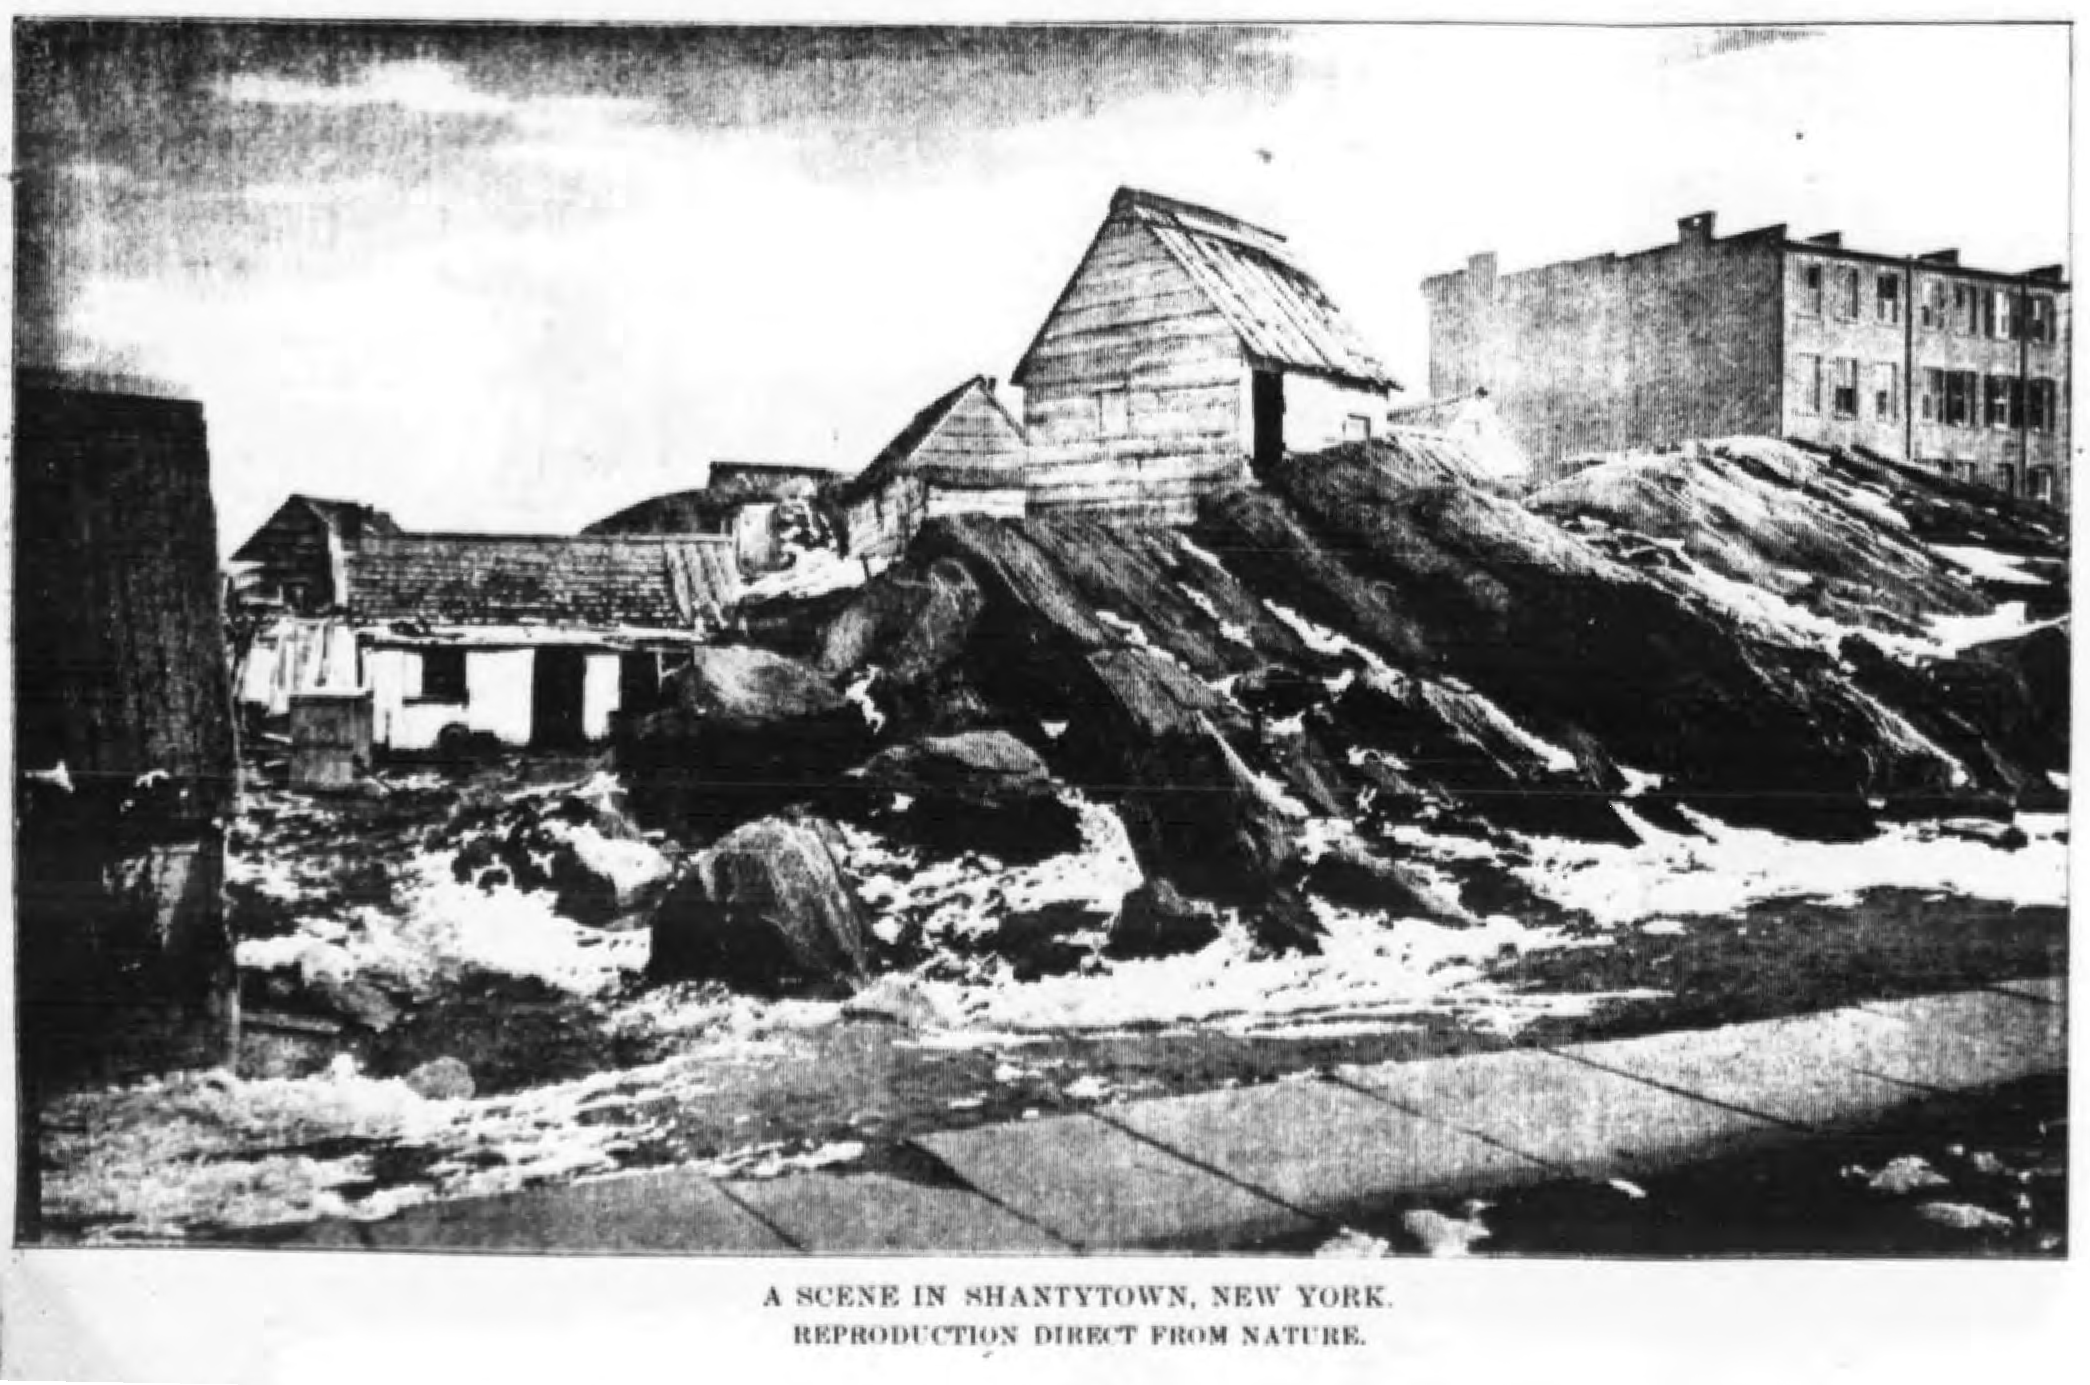 first daily news photograph print from The daily Graphic 1880